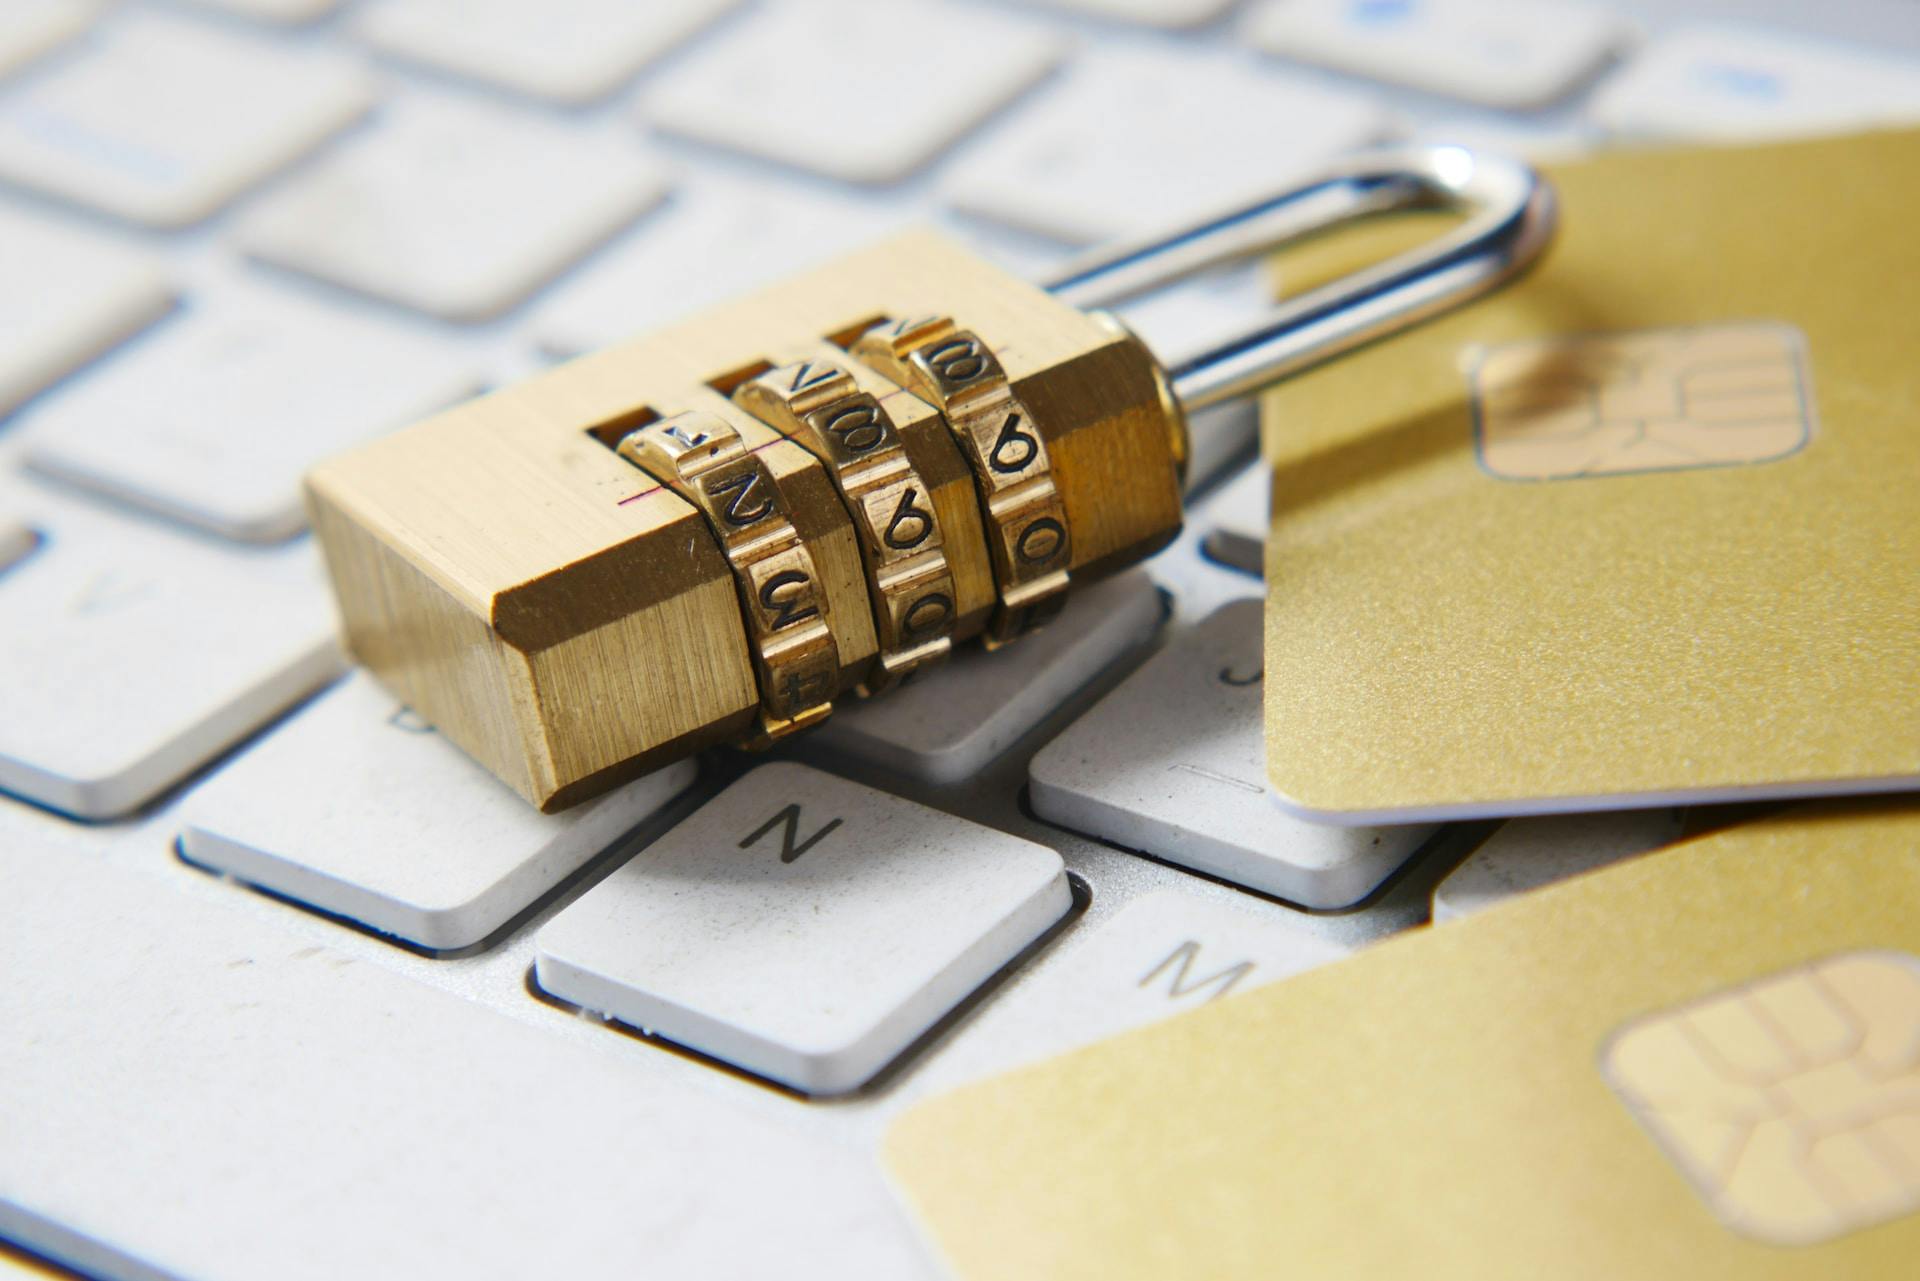 A golden padlock on a laptop keyboard with credit cards underneath